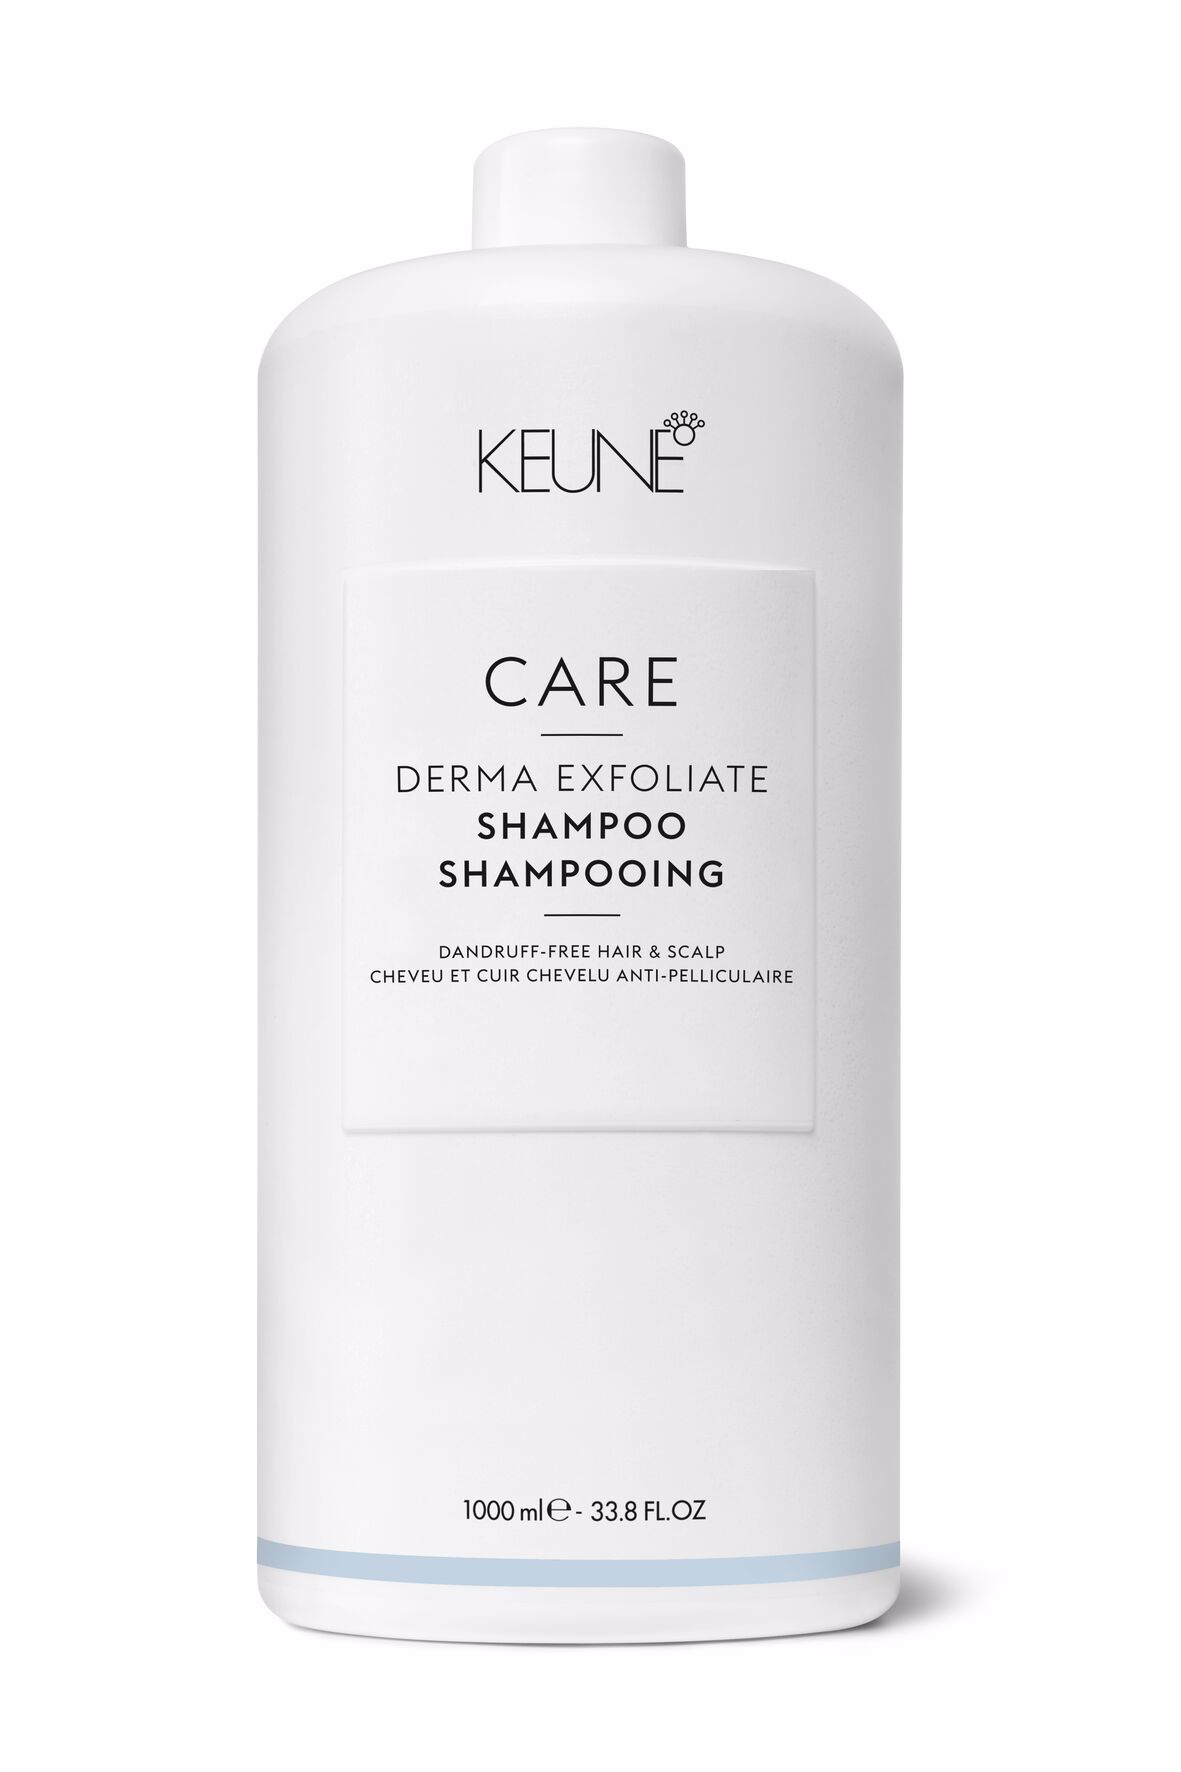 Explore our silicone-free Derma Exfoliate Shampoo that fights dandruff. It soothes the scalp, removes visible dandruff, and promotes healthy hair. Try it now on keune.ch!